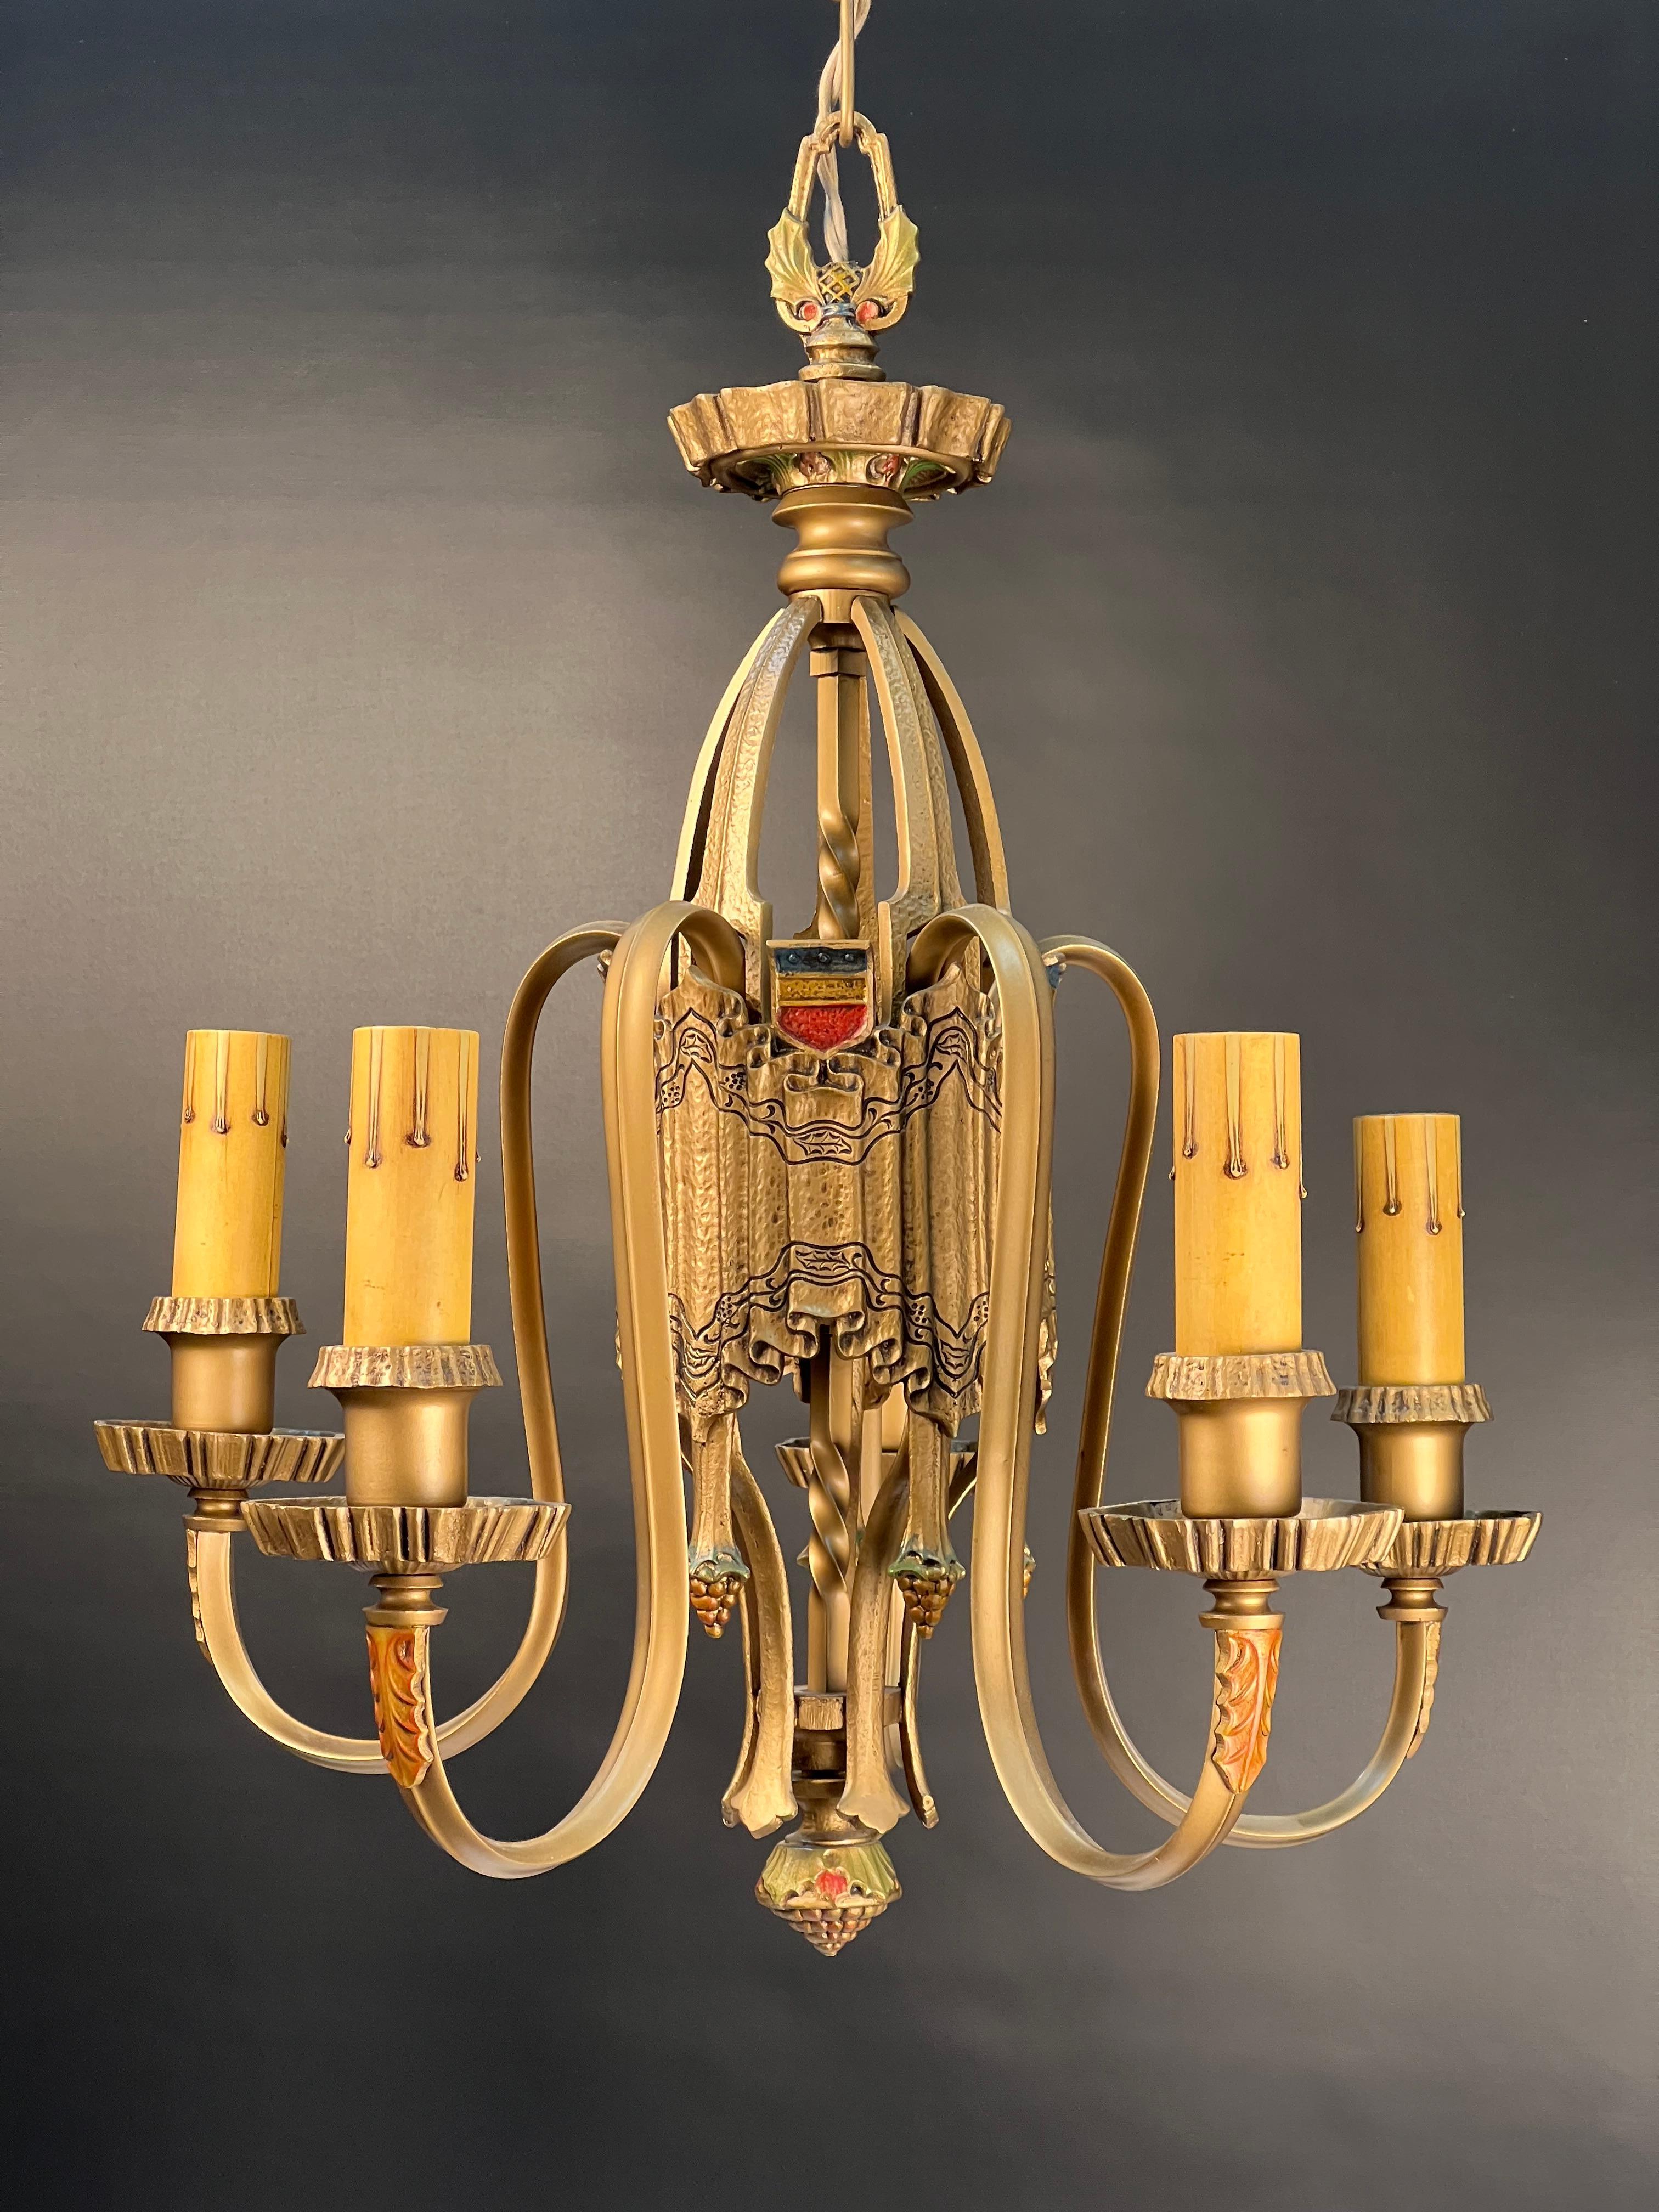 A handsome 1920's Tudor revival five light chandelier with a subtly rich gold patina with classic polychrome highlights.
The central body of this chandelier is cast in the classical design of a linen fold. Linen fold started as carved wood imitating